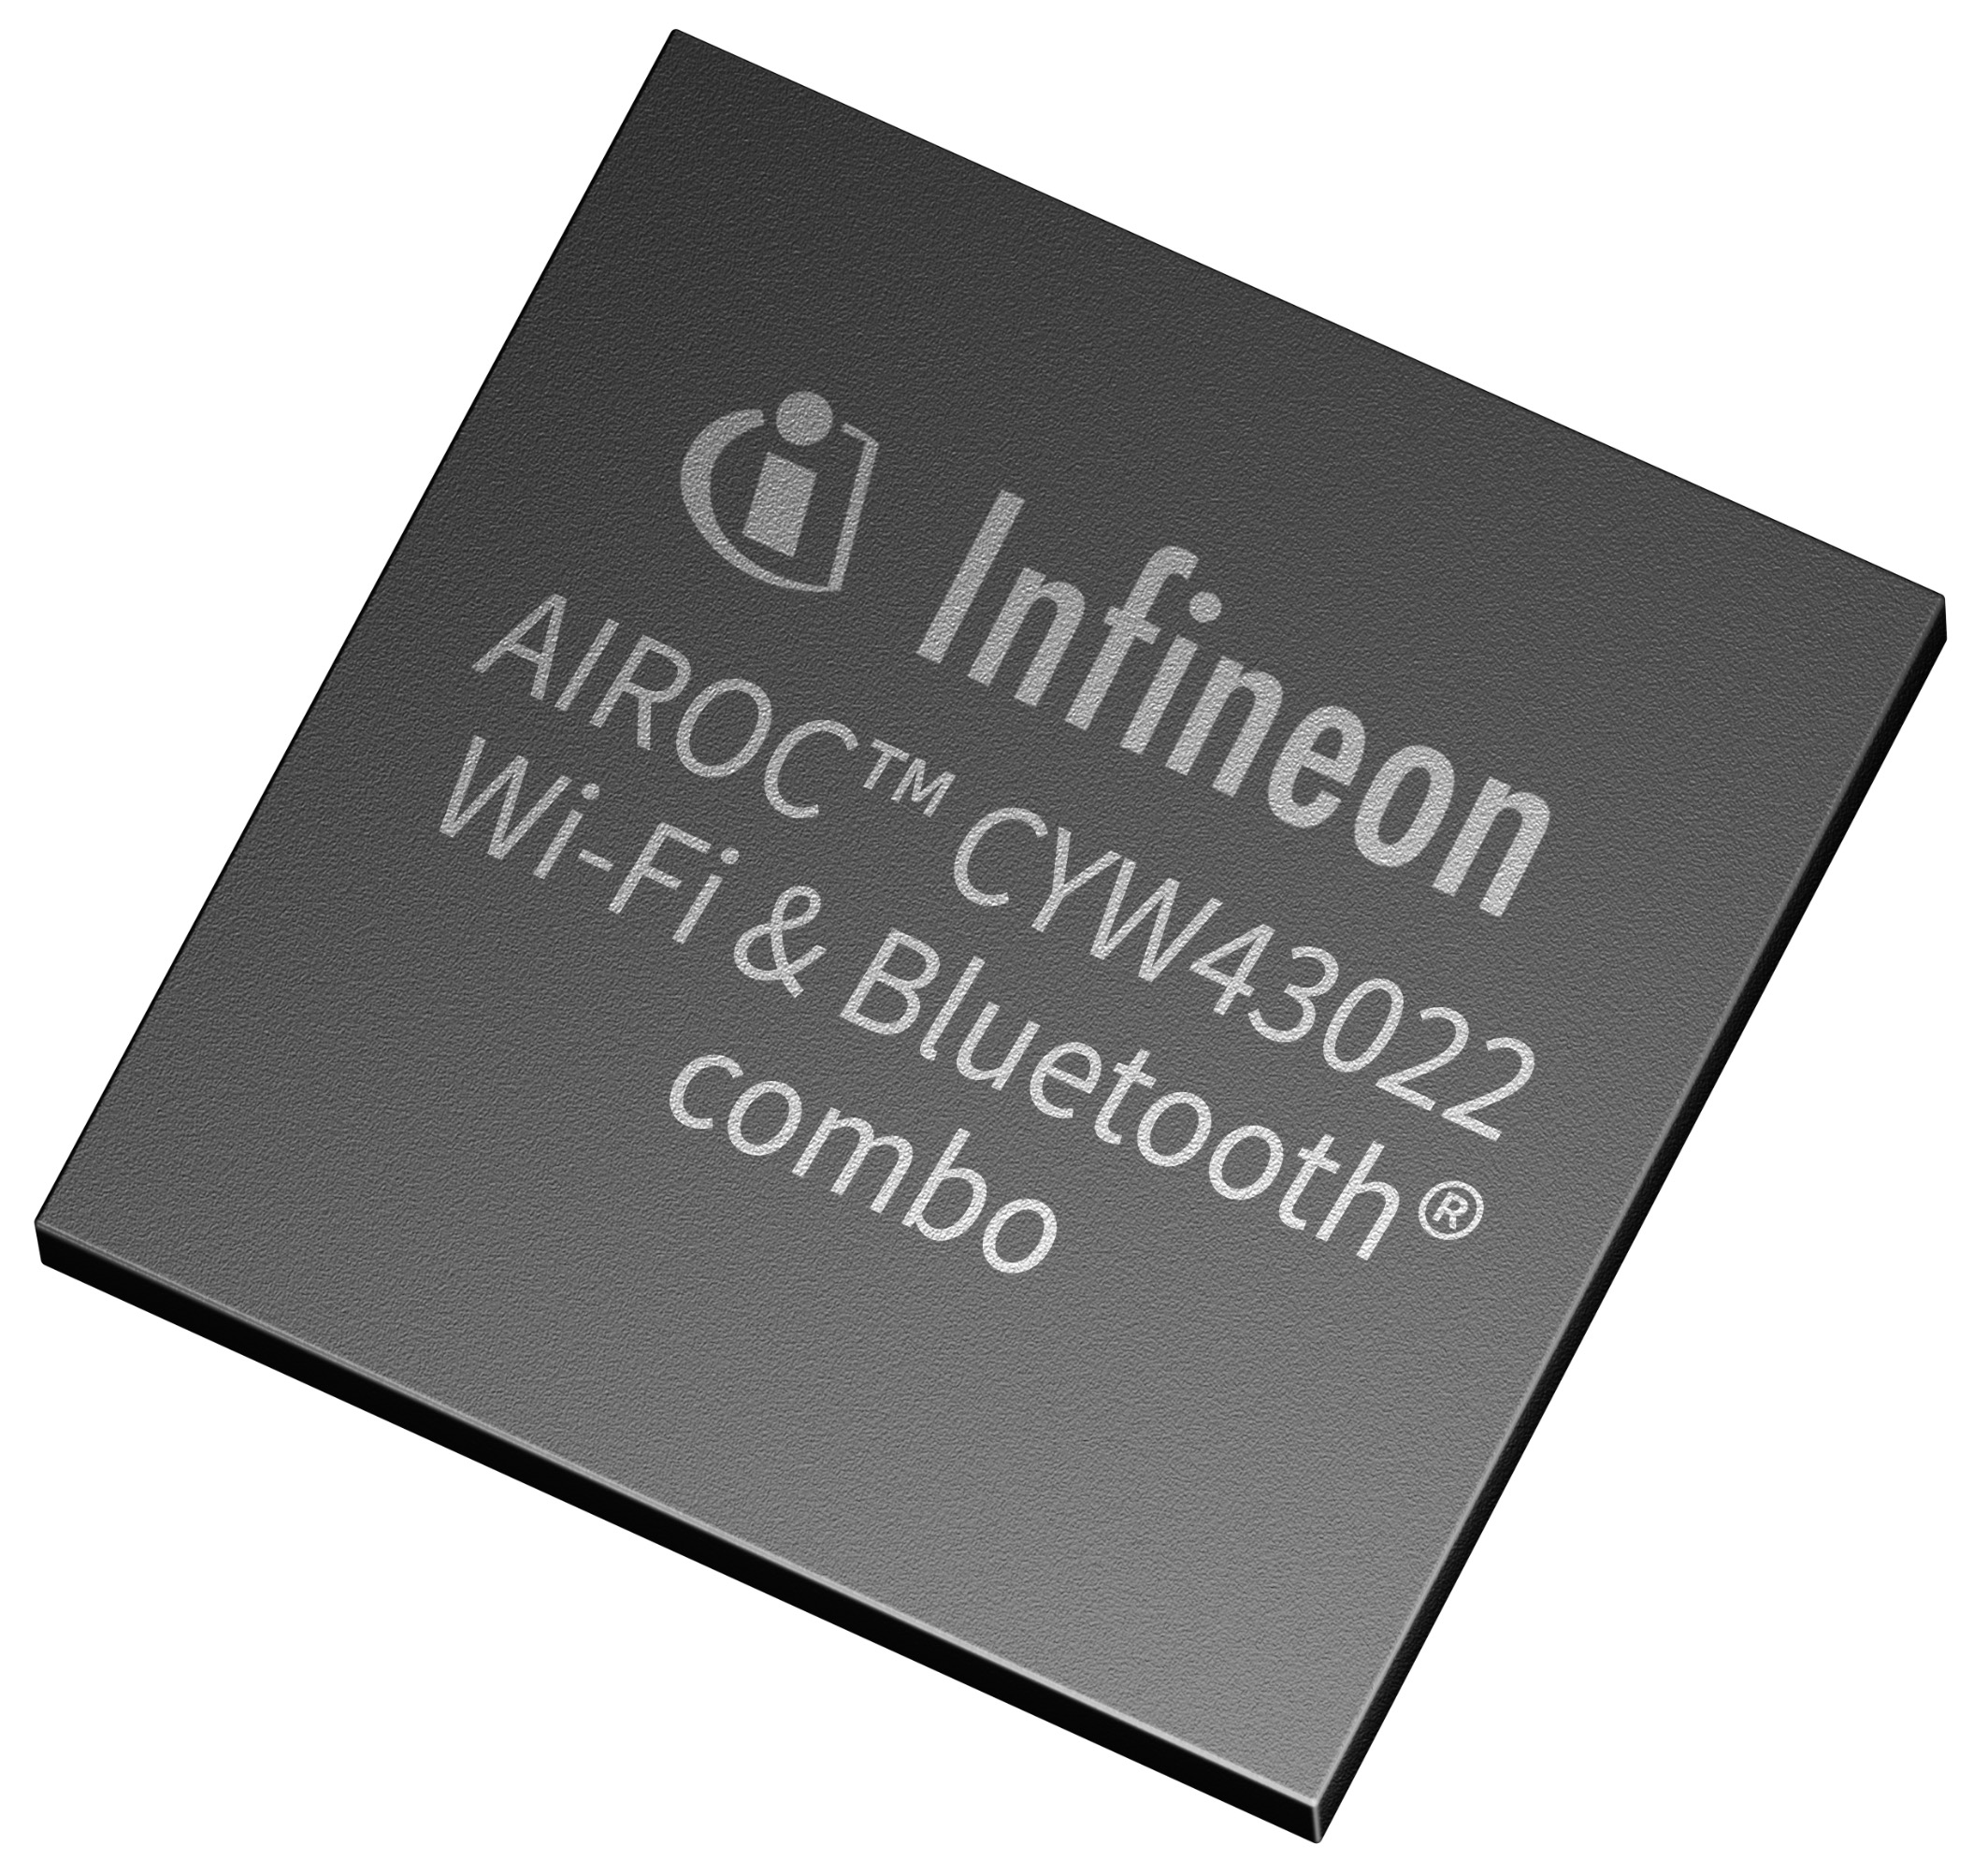 Infineon introduces AIROC™ CYW43022 Wi-Fi 5 and Bluetooth® 2-in-1 product, which reduces power consumption by 65%, significantly extending battery life in IoT applications